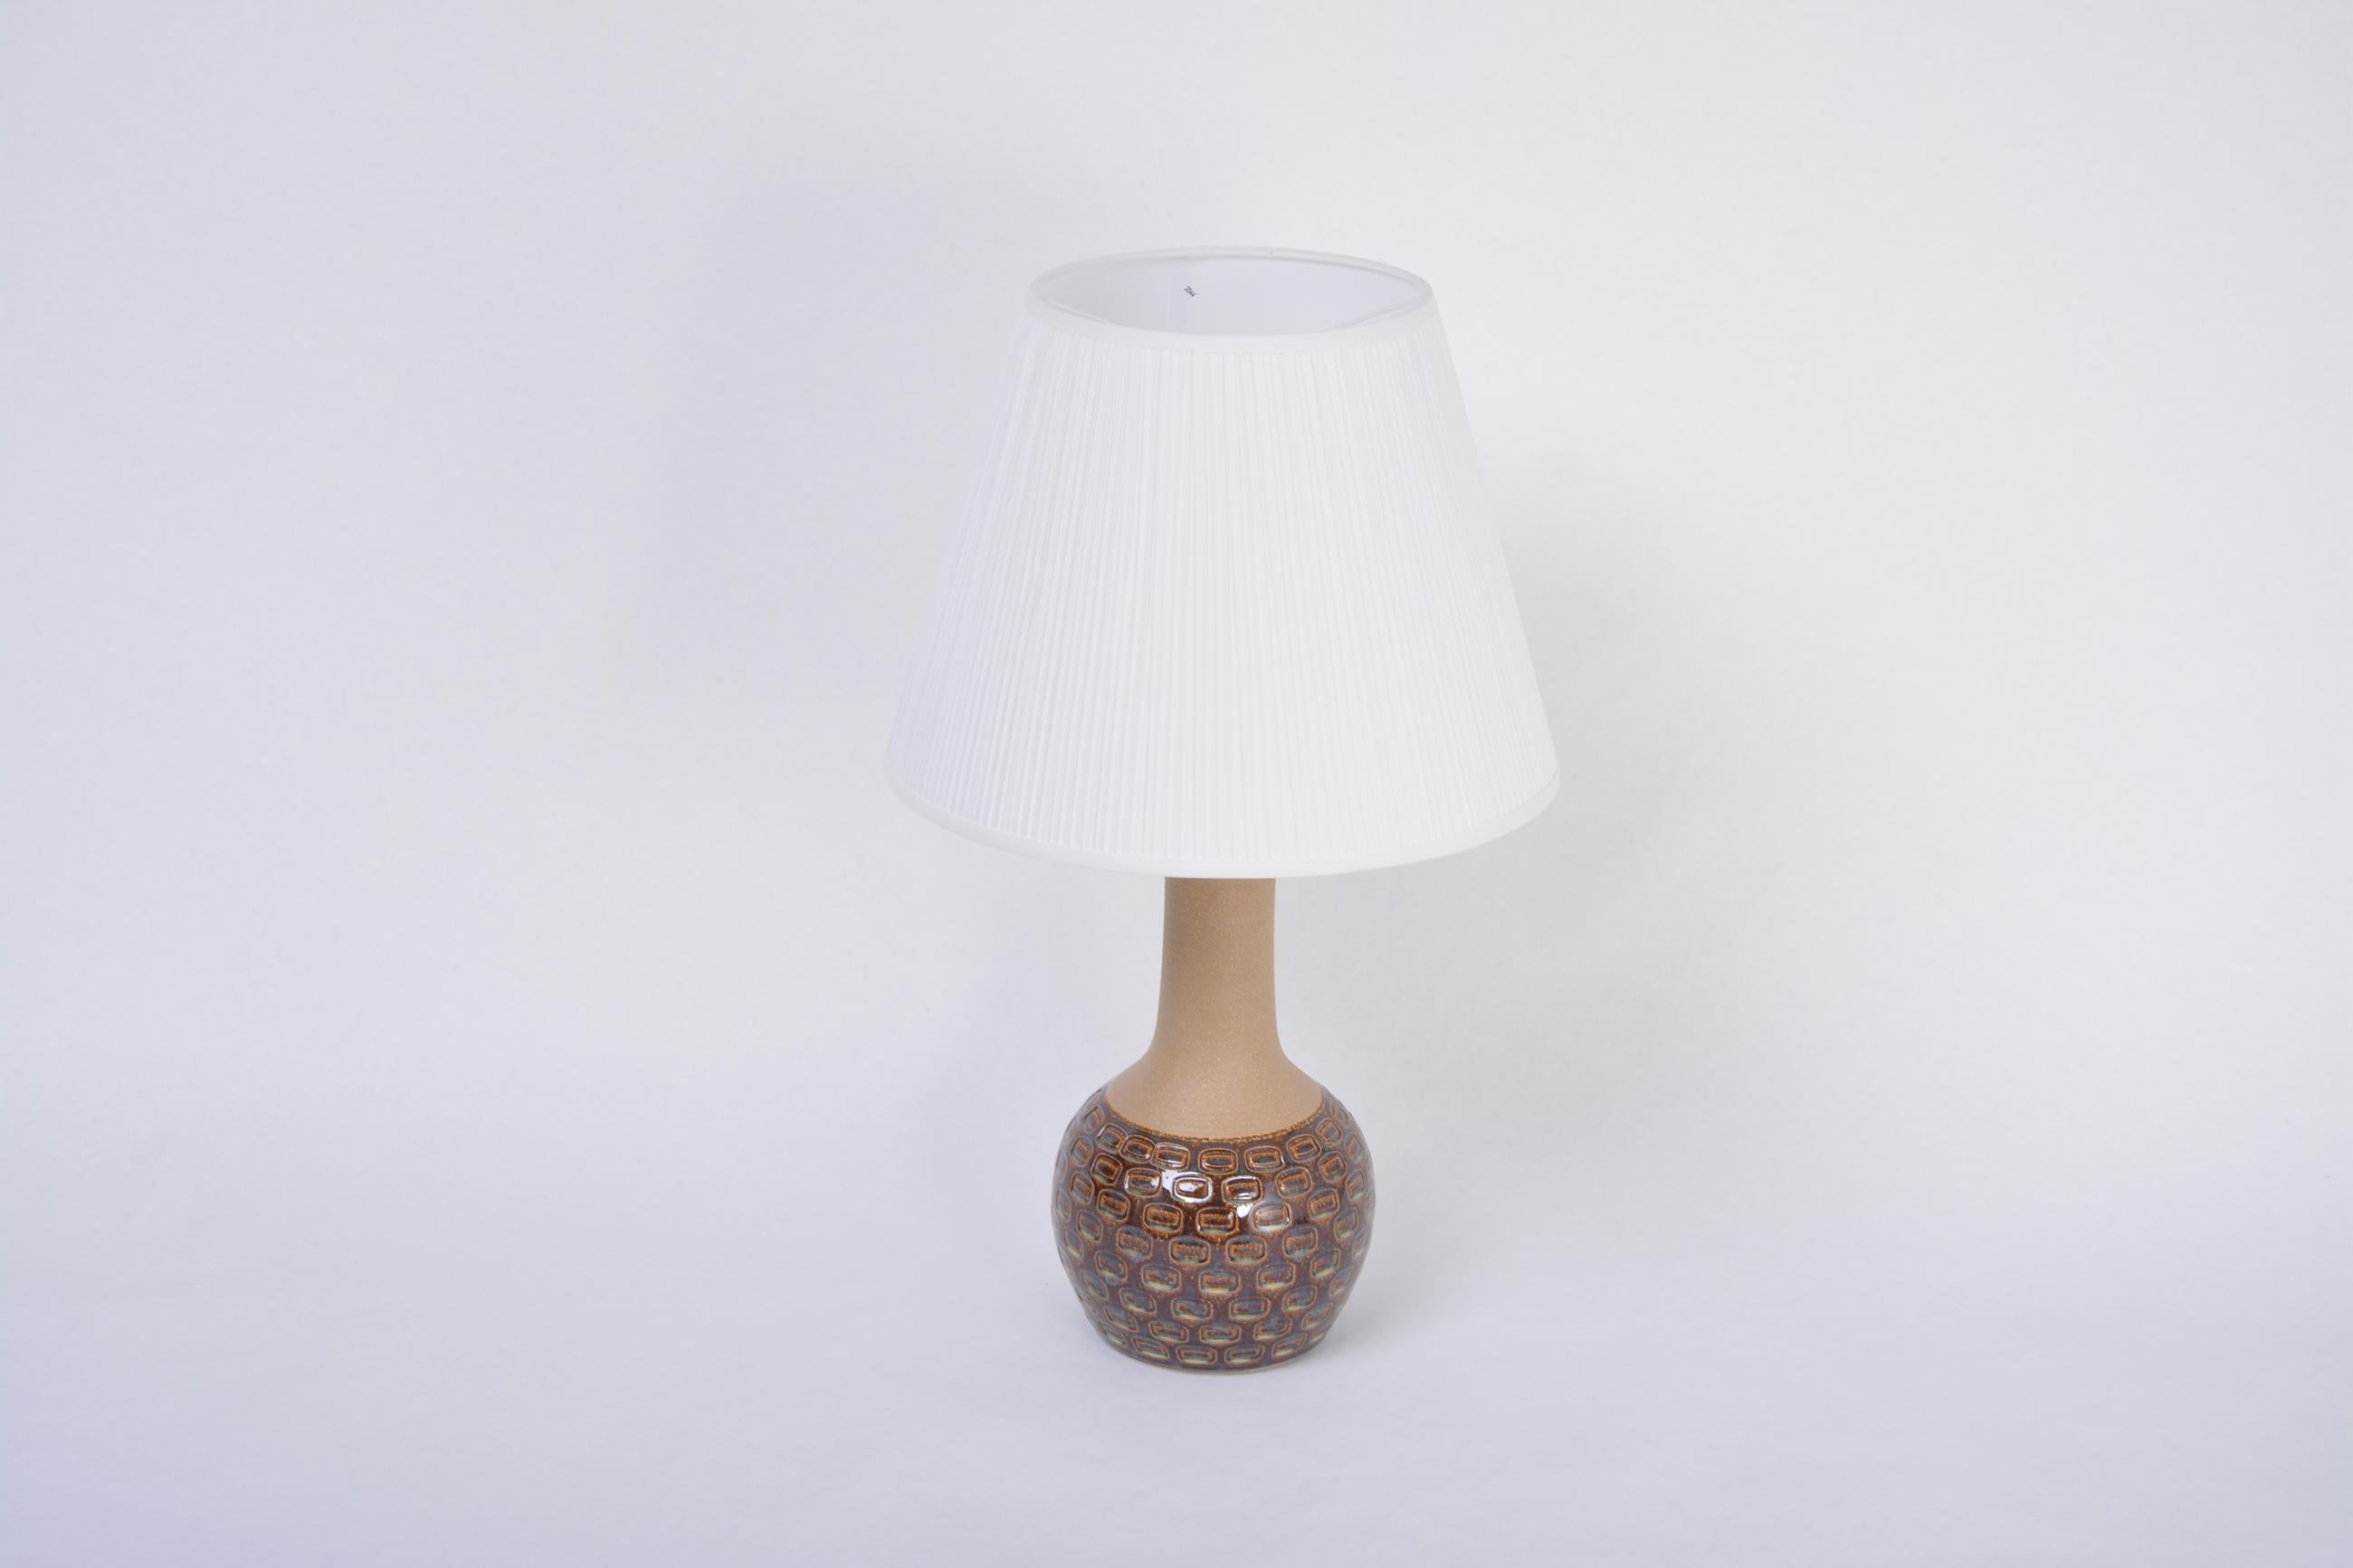 Handmade Danish Mid-Century Modern stoneware lamp with graphic pattern by Soholm
Table lamp handmade of stoneware with ceramic glazing in tones of brown and blue. Graphical pattern to the base of the lamp. Produced by Danish company Soholm. The